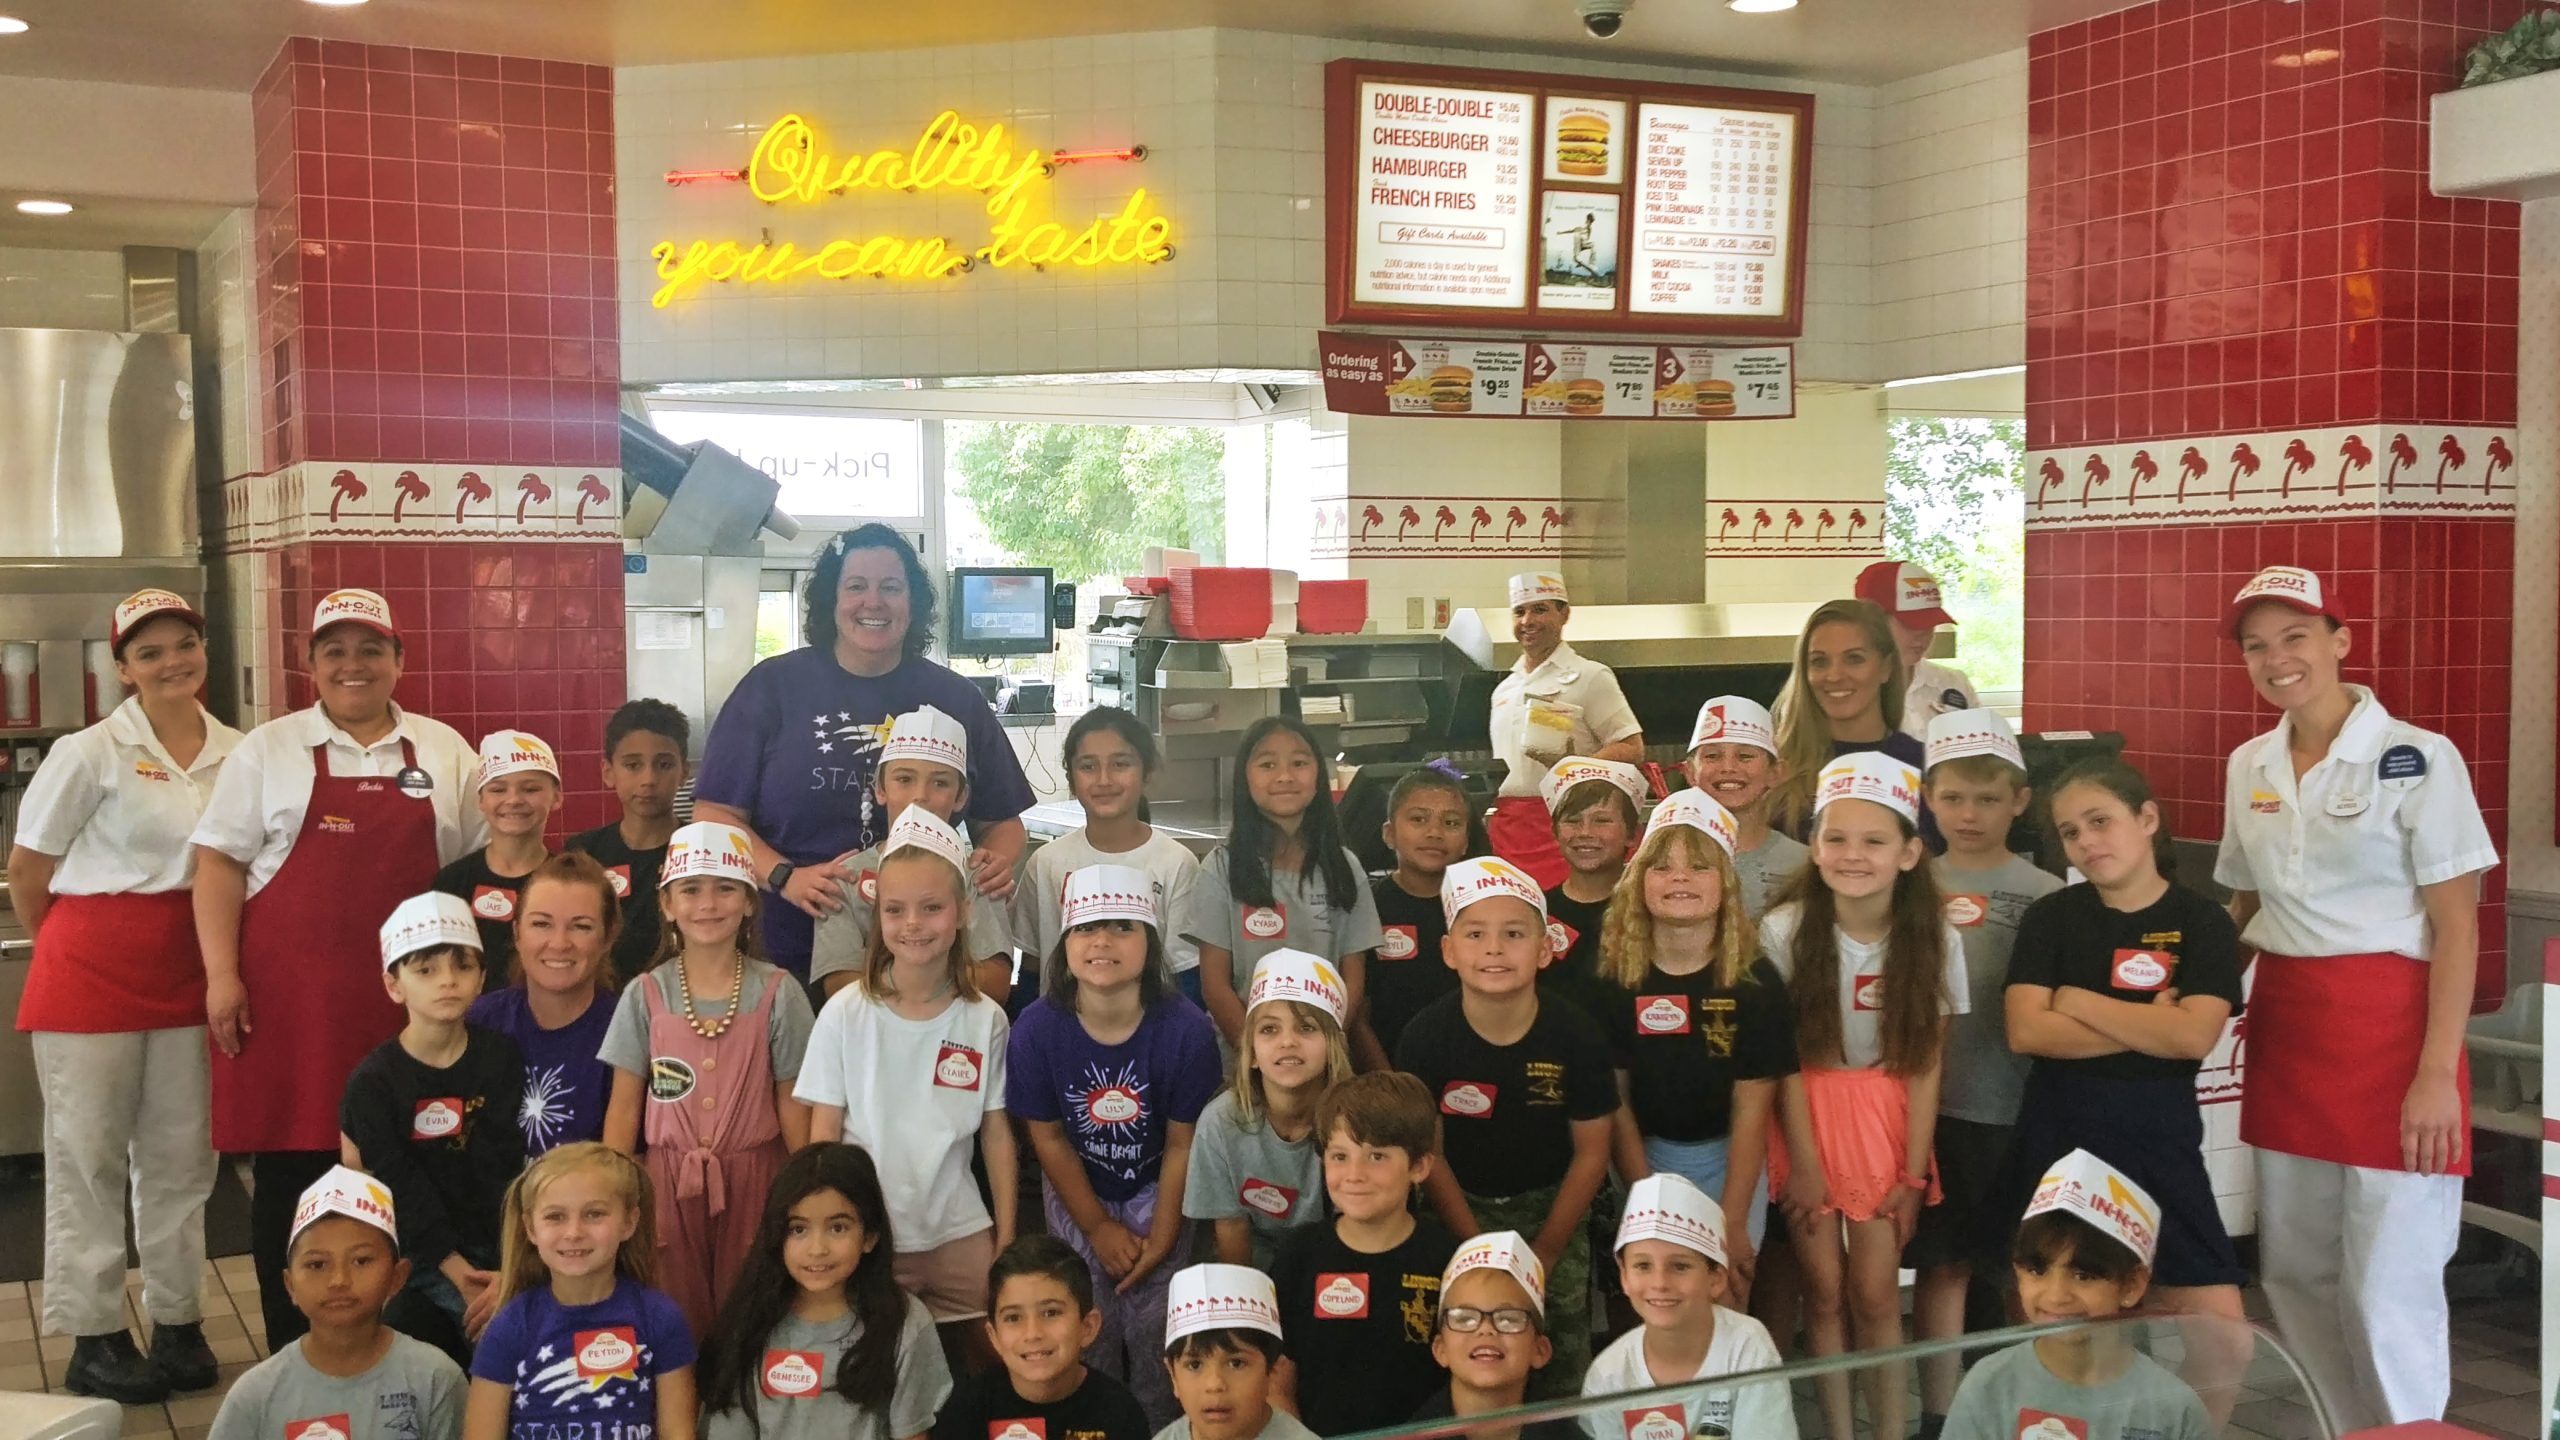 Starline Students Learn History And Business Skills At In-N-Out Field Trip